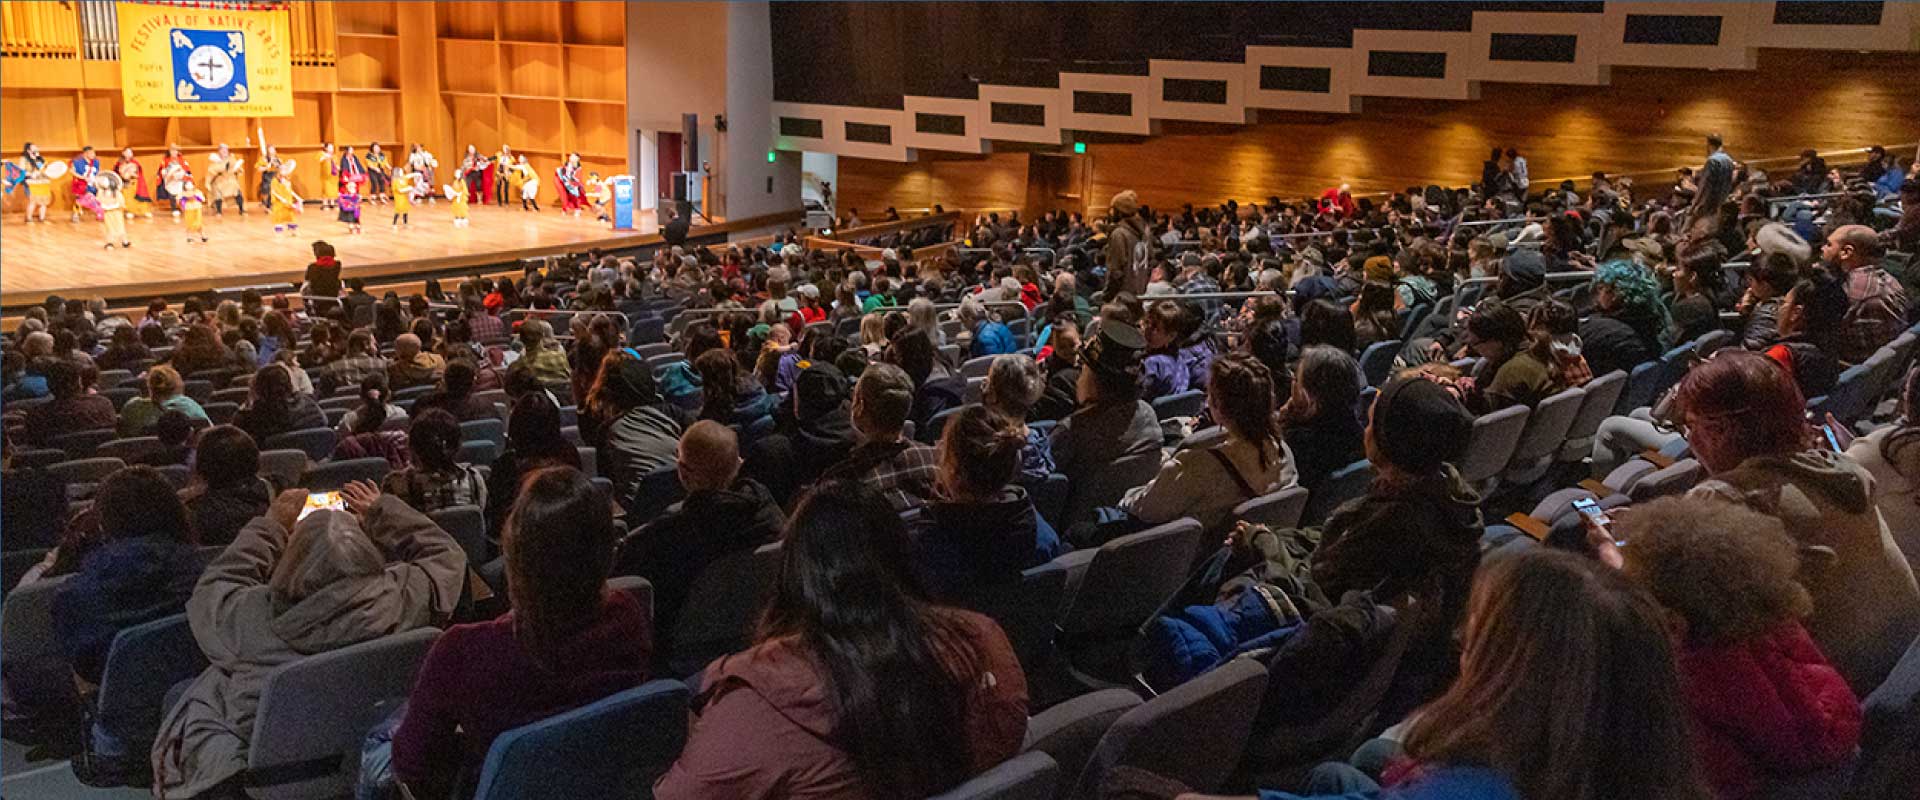 Audience members at the Charles Davis Concert Hall at the Troth Yeddha' Campus in Fairbanks watch a dance performance during the Festival of Native Arts